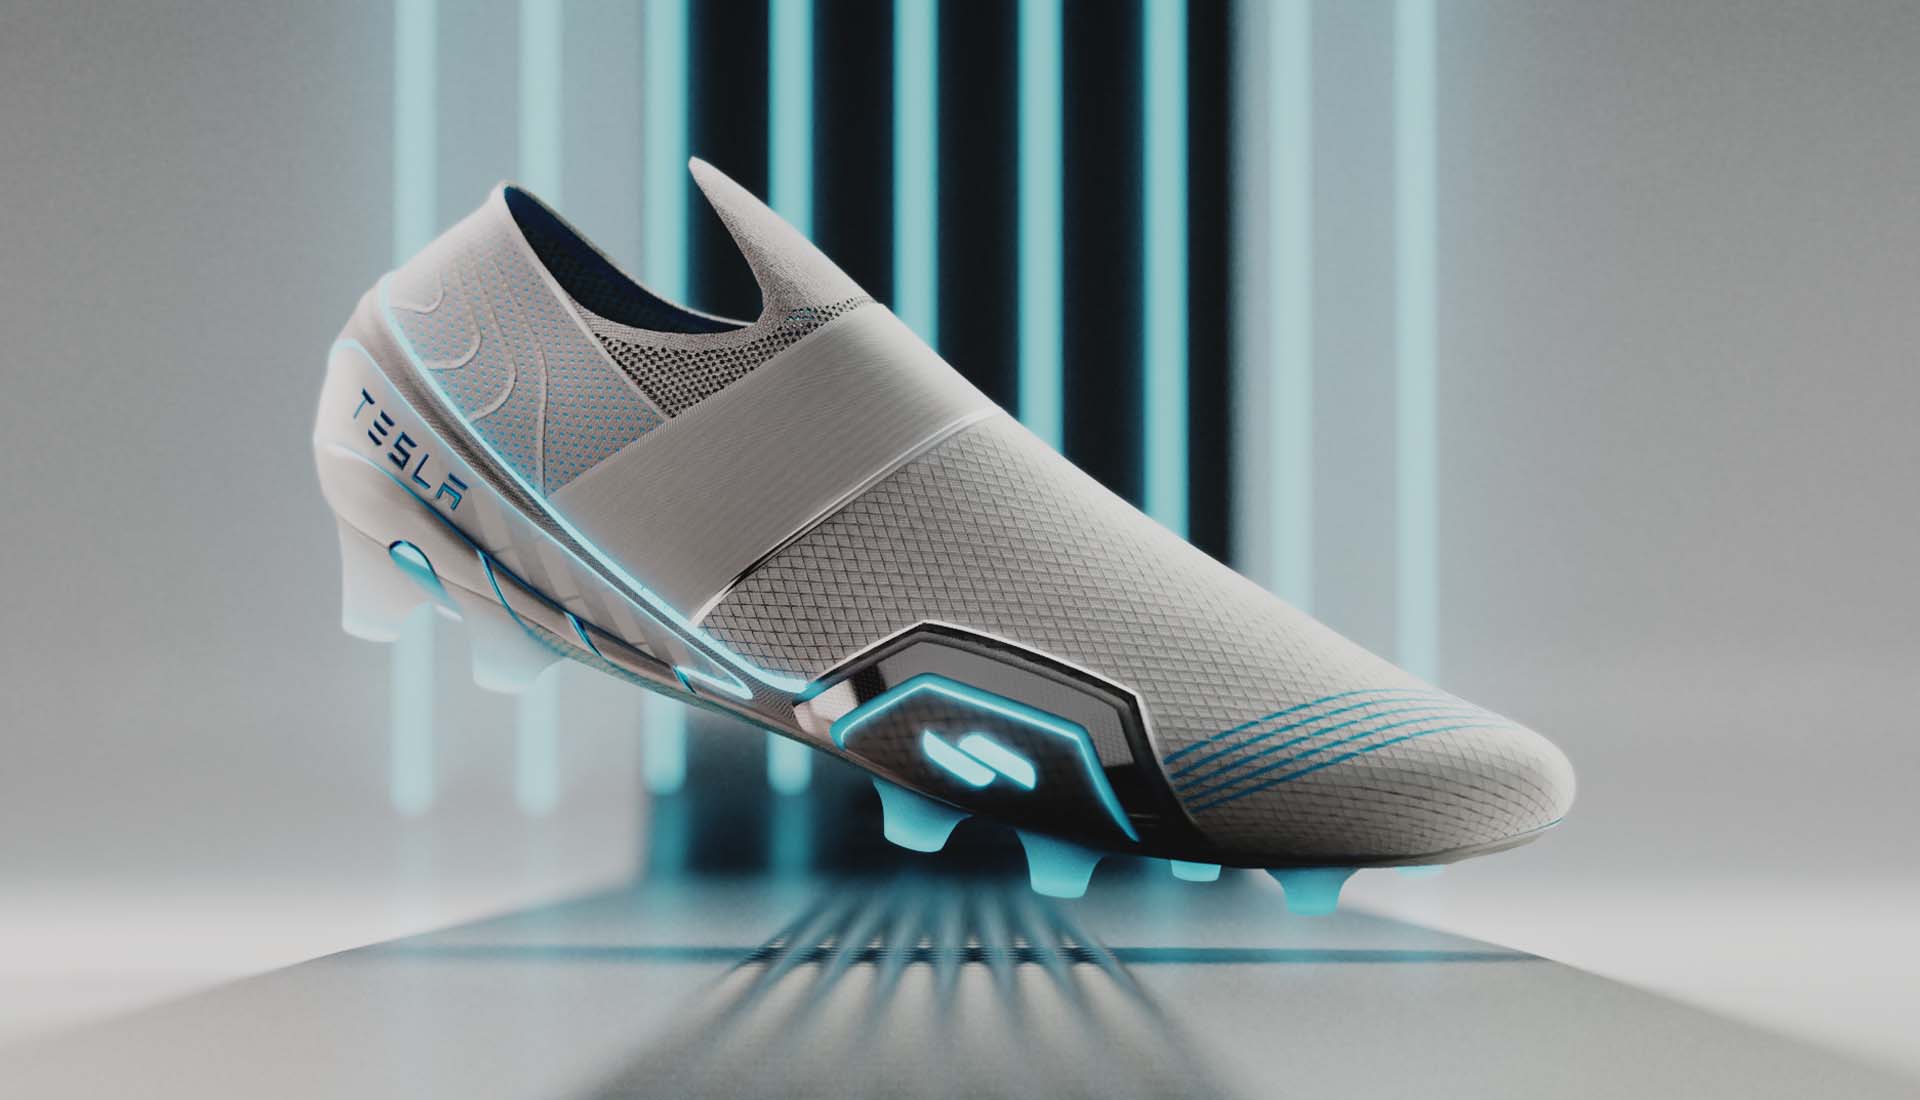 Mossawi Studios Tesla Concept Boots SoccerBible